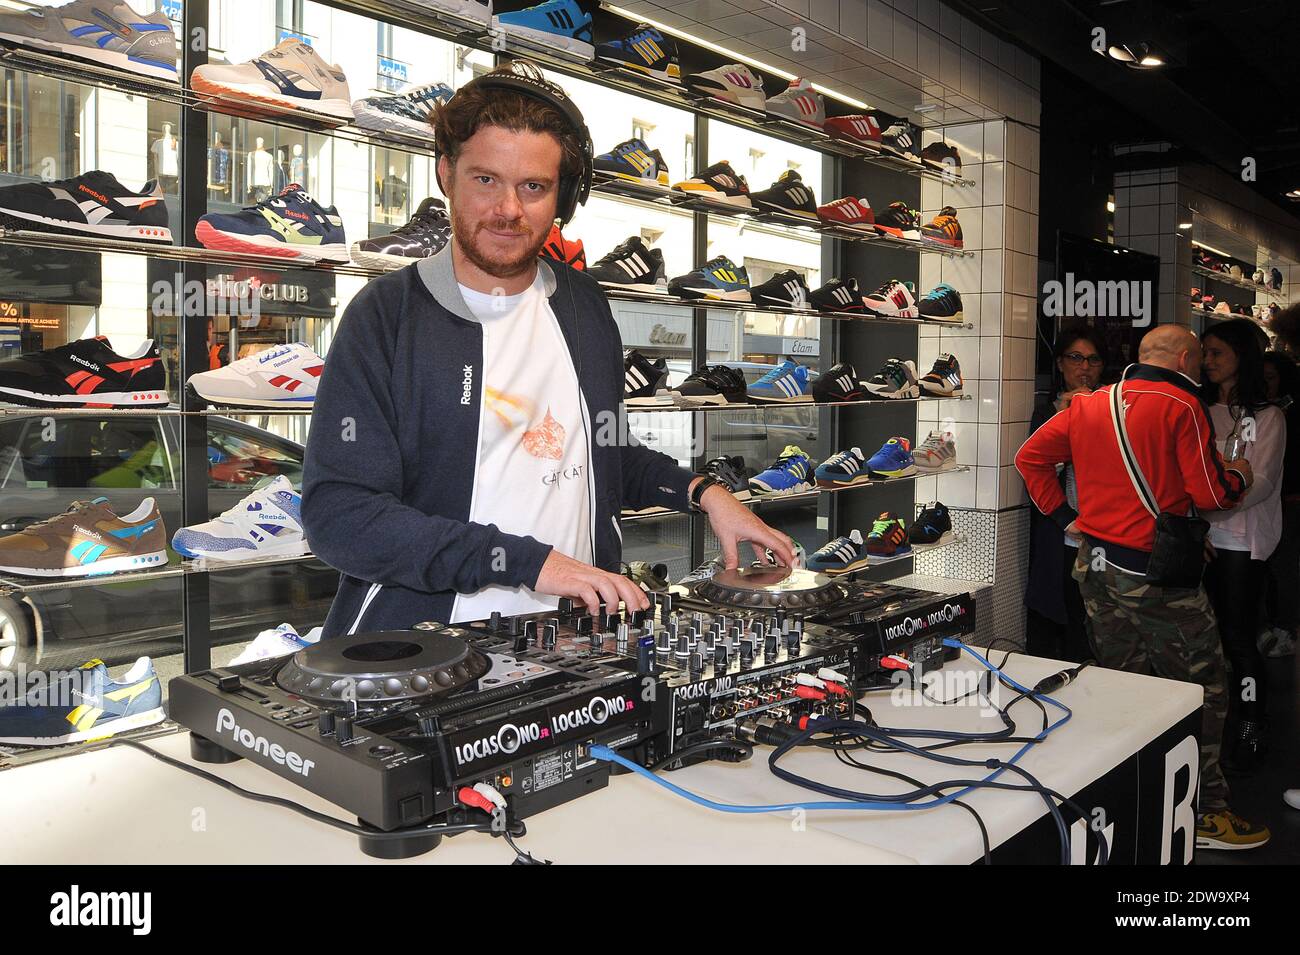 Atmosphere during the Reebok Concept Store Hub Bastille at Bastille in  Paris, France on June 20, 2014. Photo by Thierry Plessis/ABACAPRESS.COM  Stock Photo - Alamy